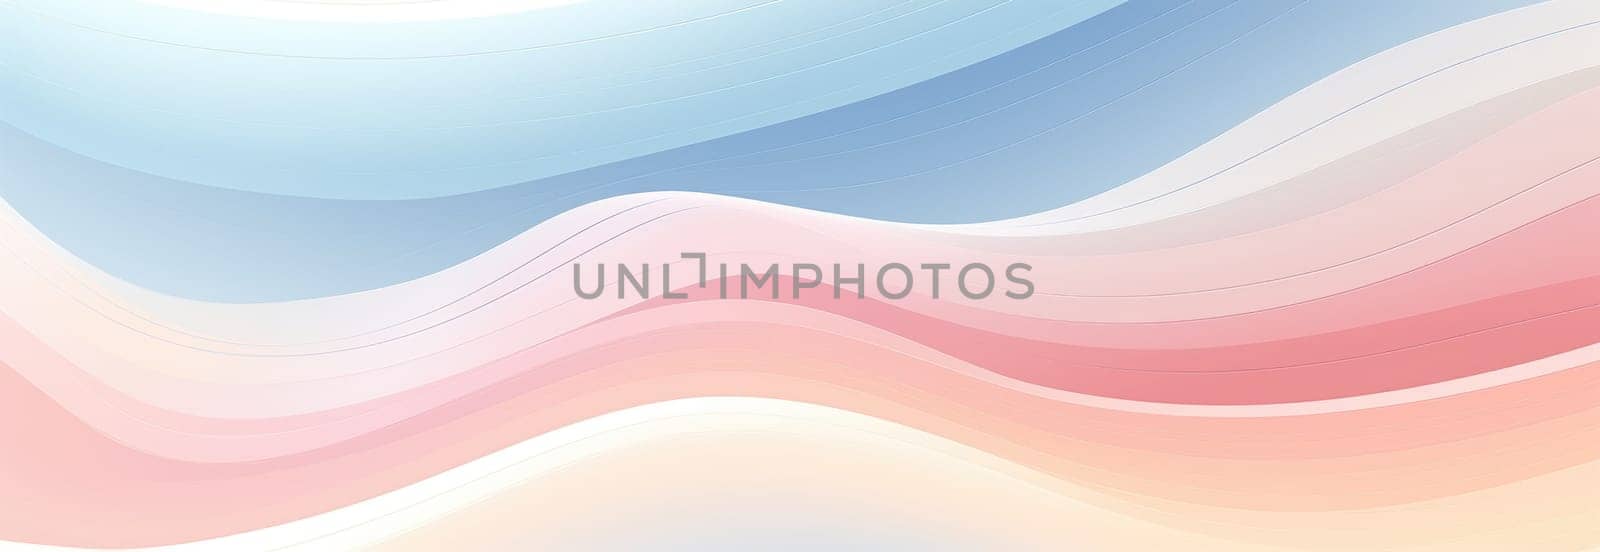 Abstract background with multicoloured wavy lines and shapes in delicate pastel shades